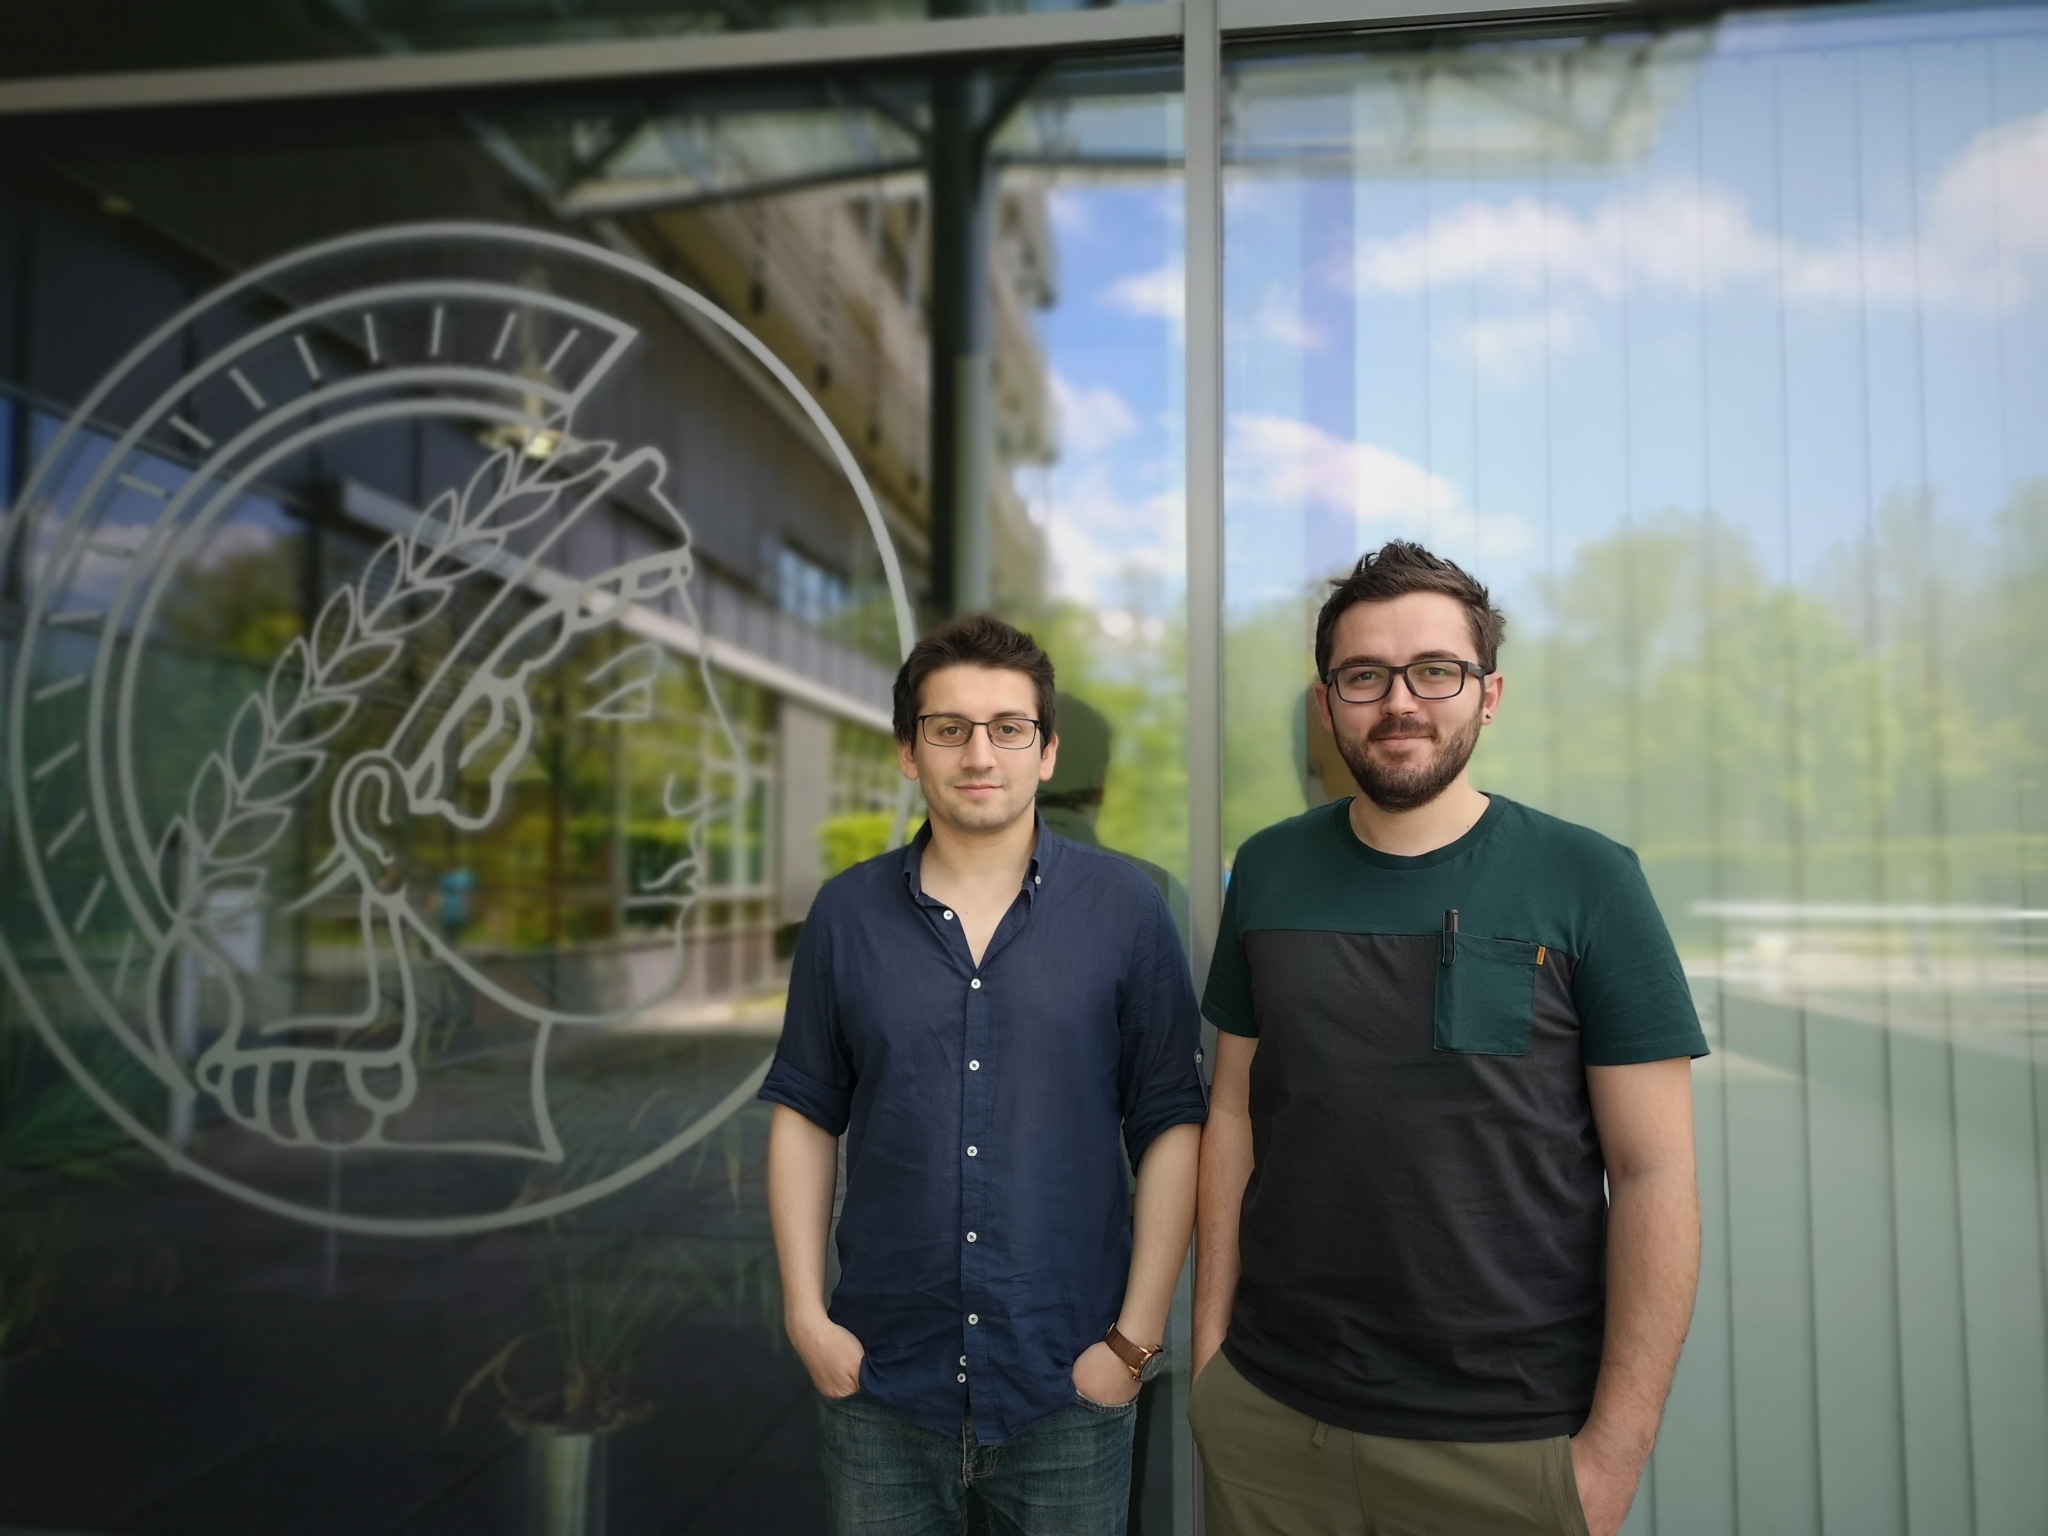 The two scientists standing in front of a door with a Max Planck logo.